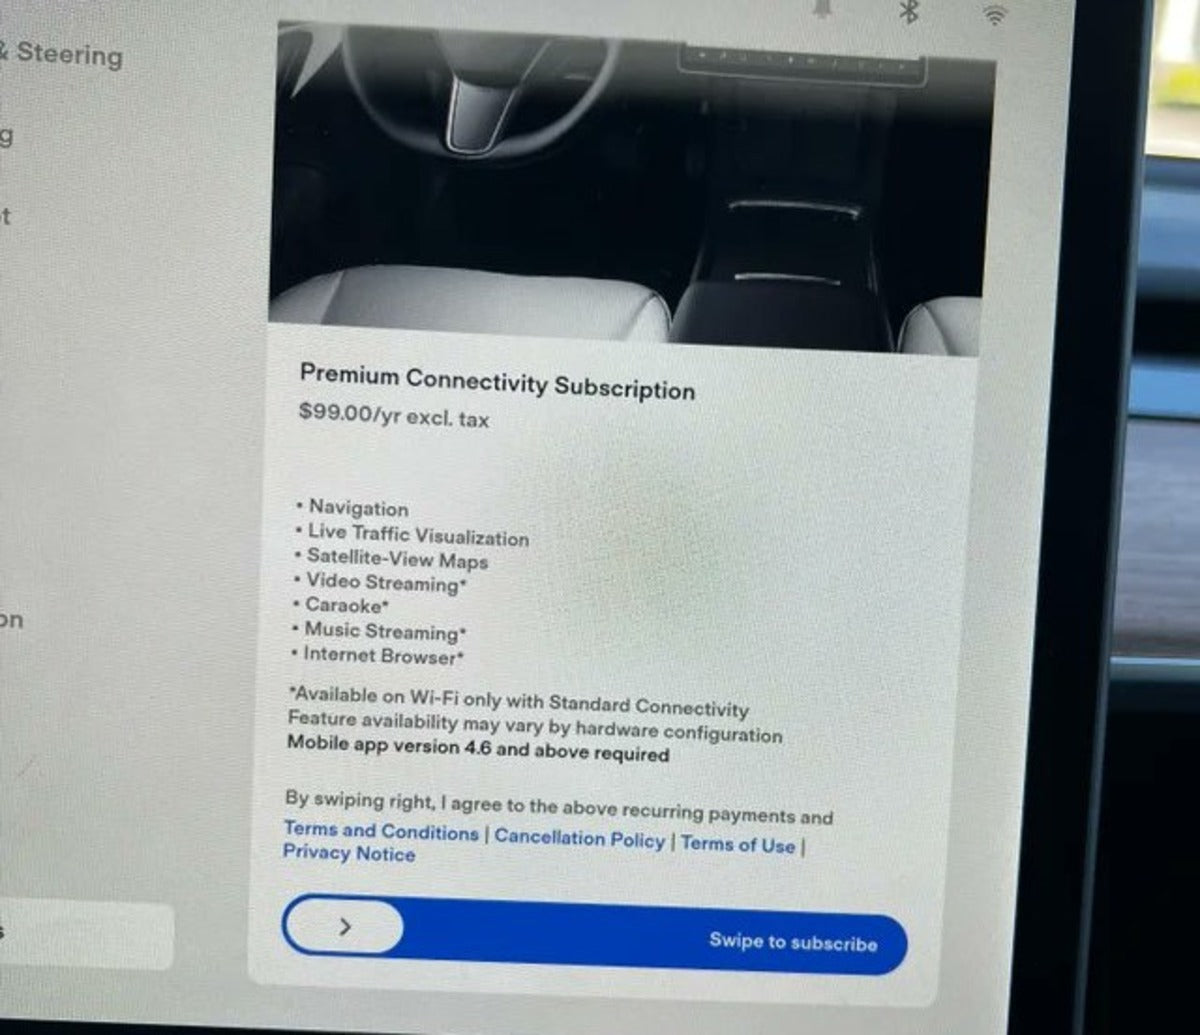 Tesla Launches Premium Connectivity Annual Subscription for Just $99